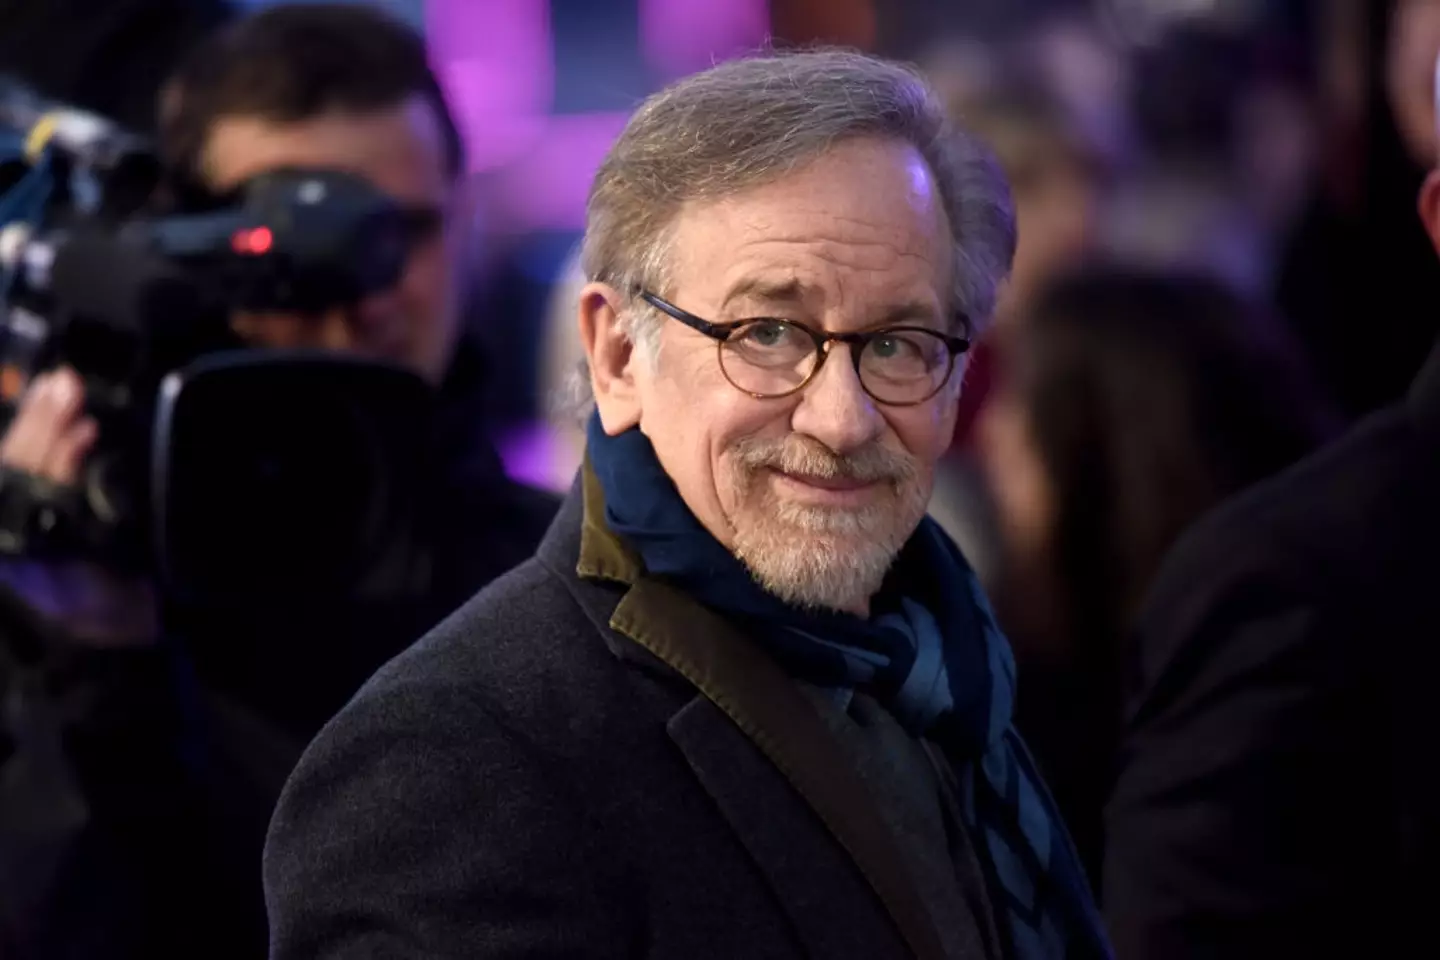 Steven Spielberg revealed who he thought were the five greatest actors of all time.